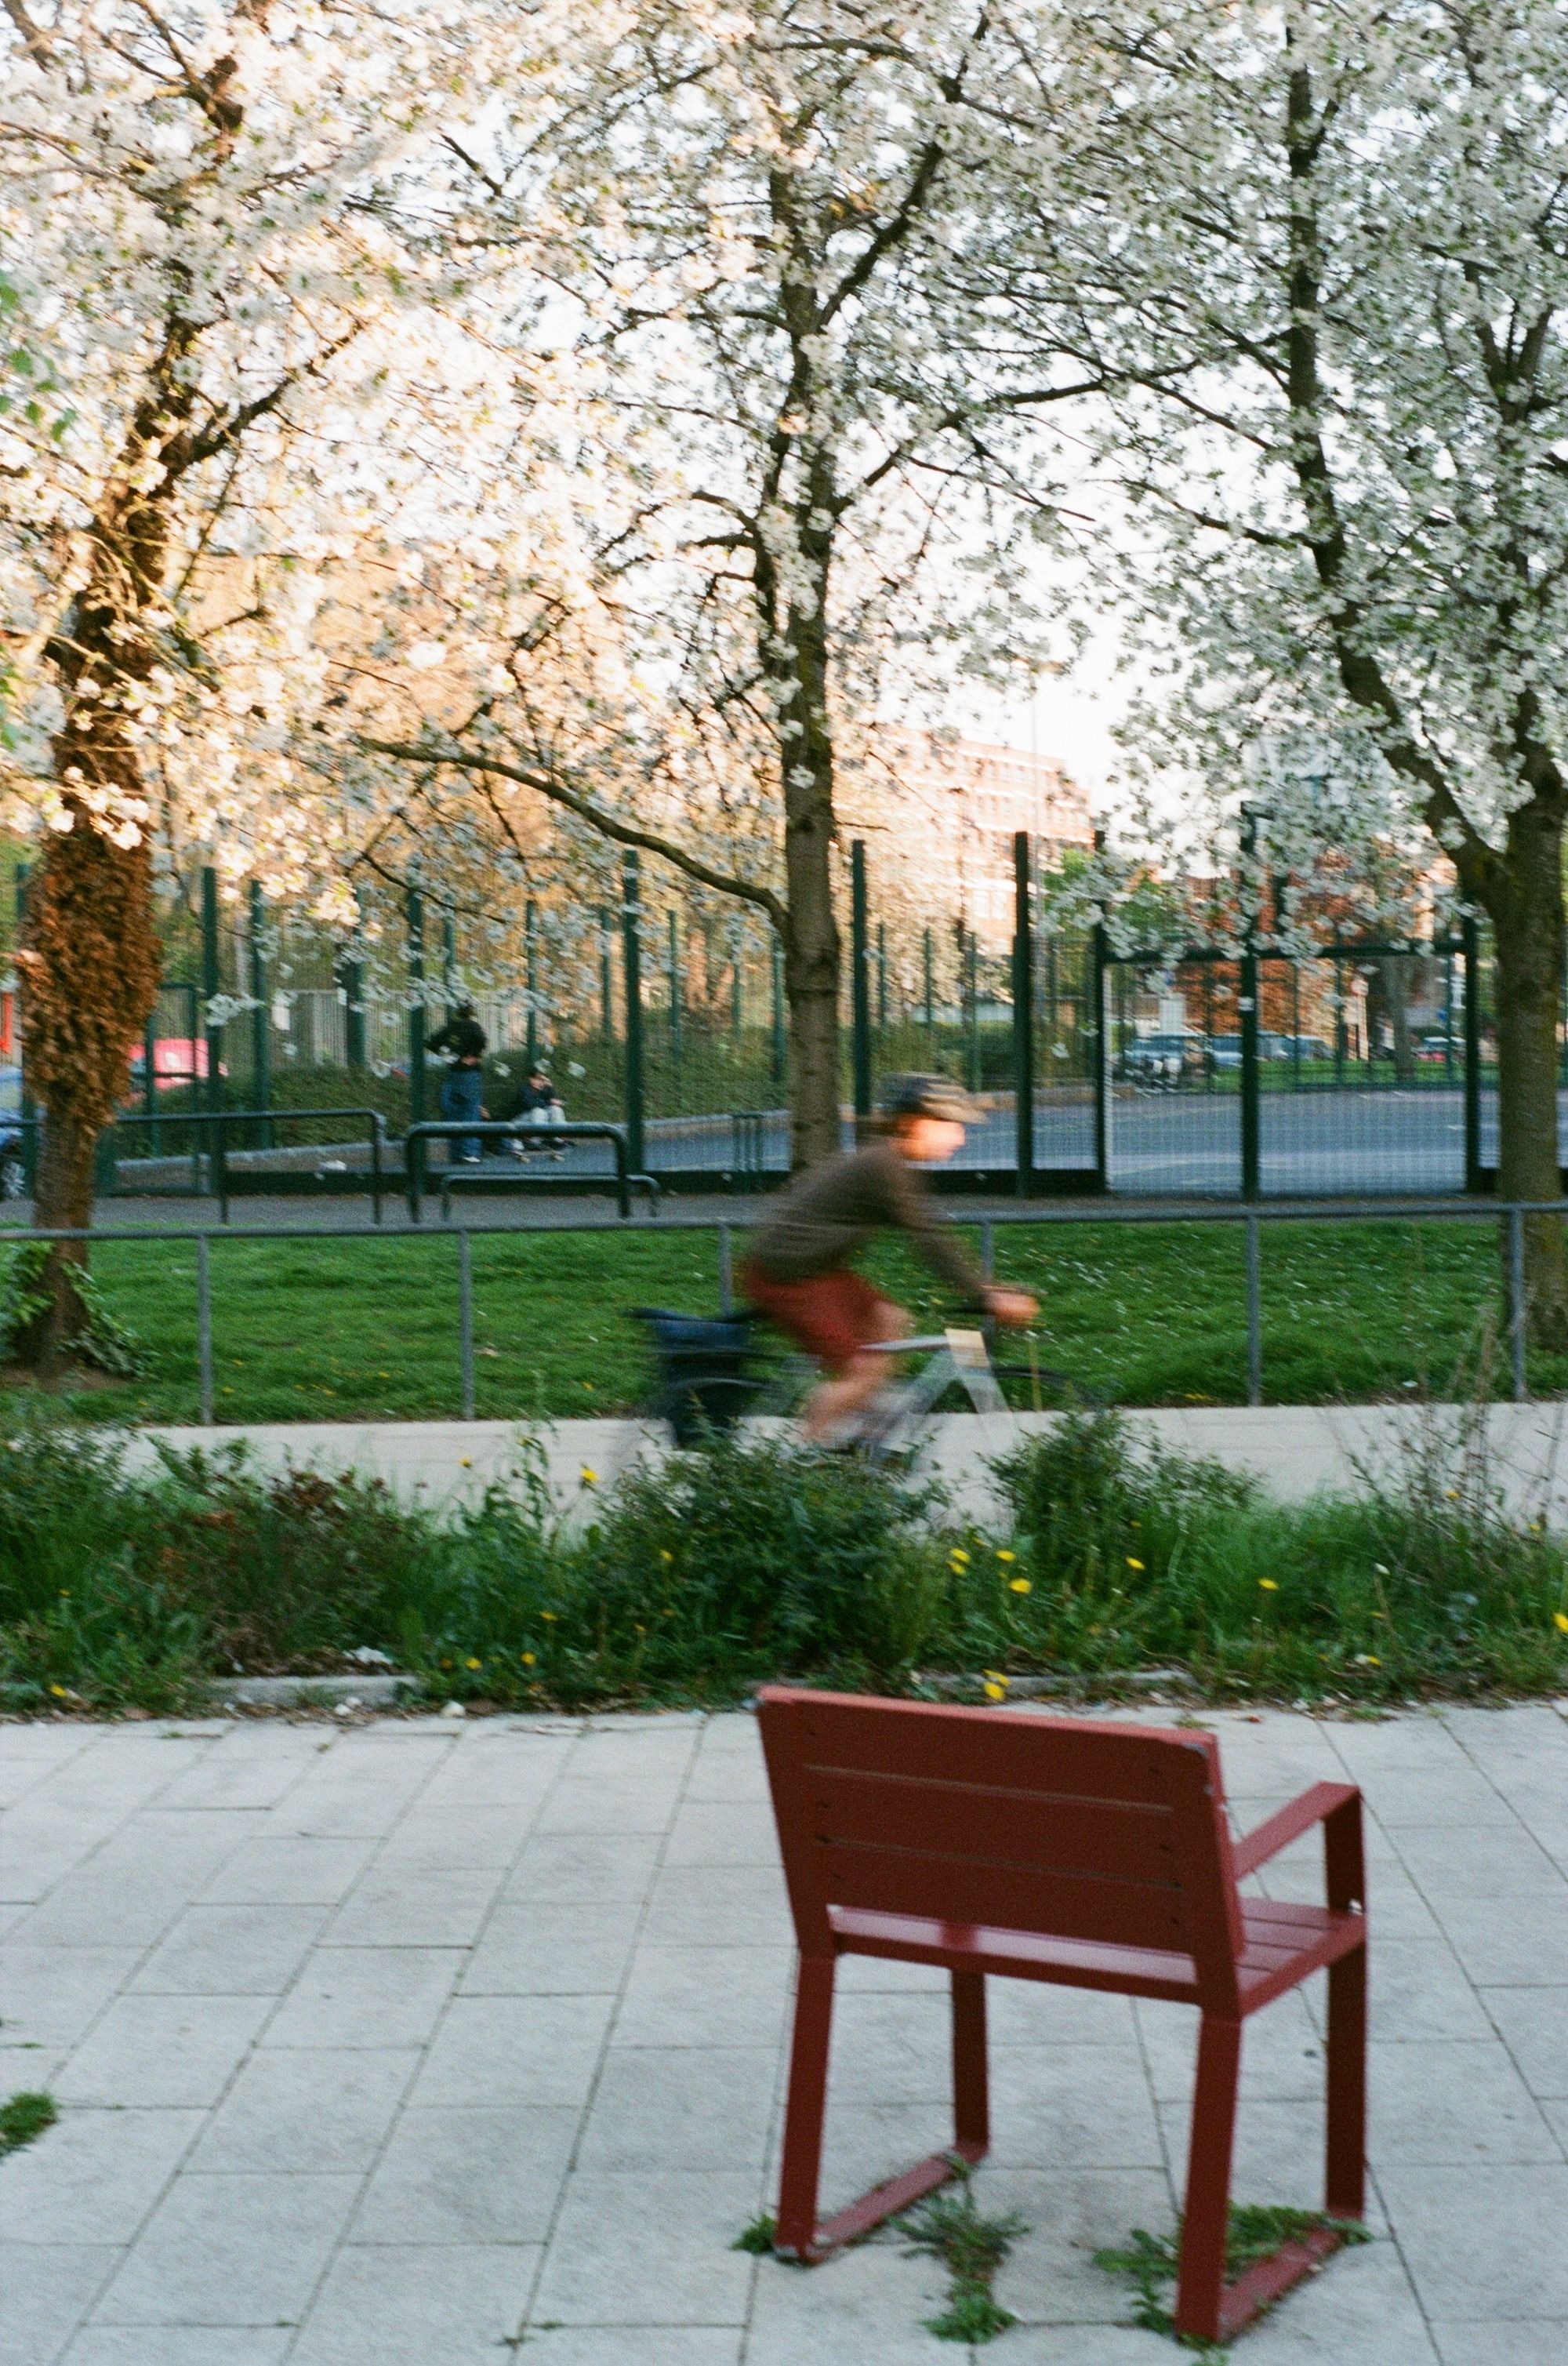 A red metal chair on a pedestrianised area looking out onto tended grass verges, a cycle track with a rider wearing red shorts going left to right, and a playground with some large, gnarly trees in blossom in the foreground.